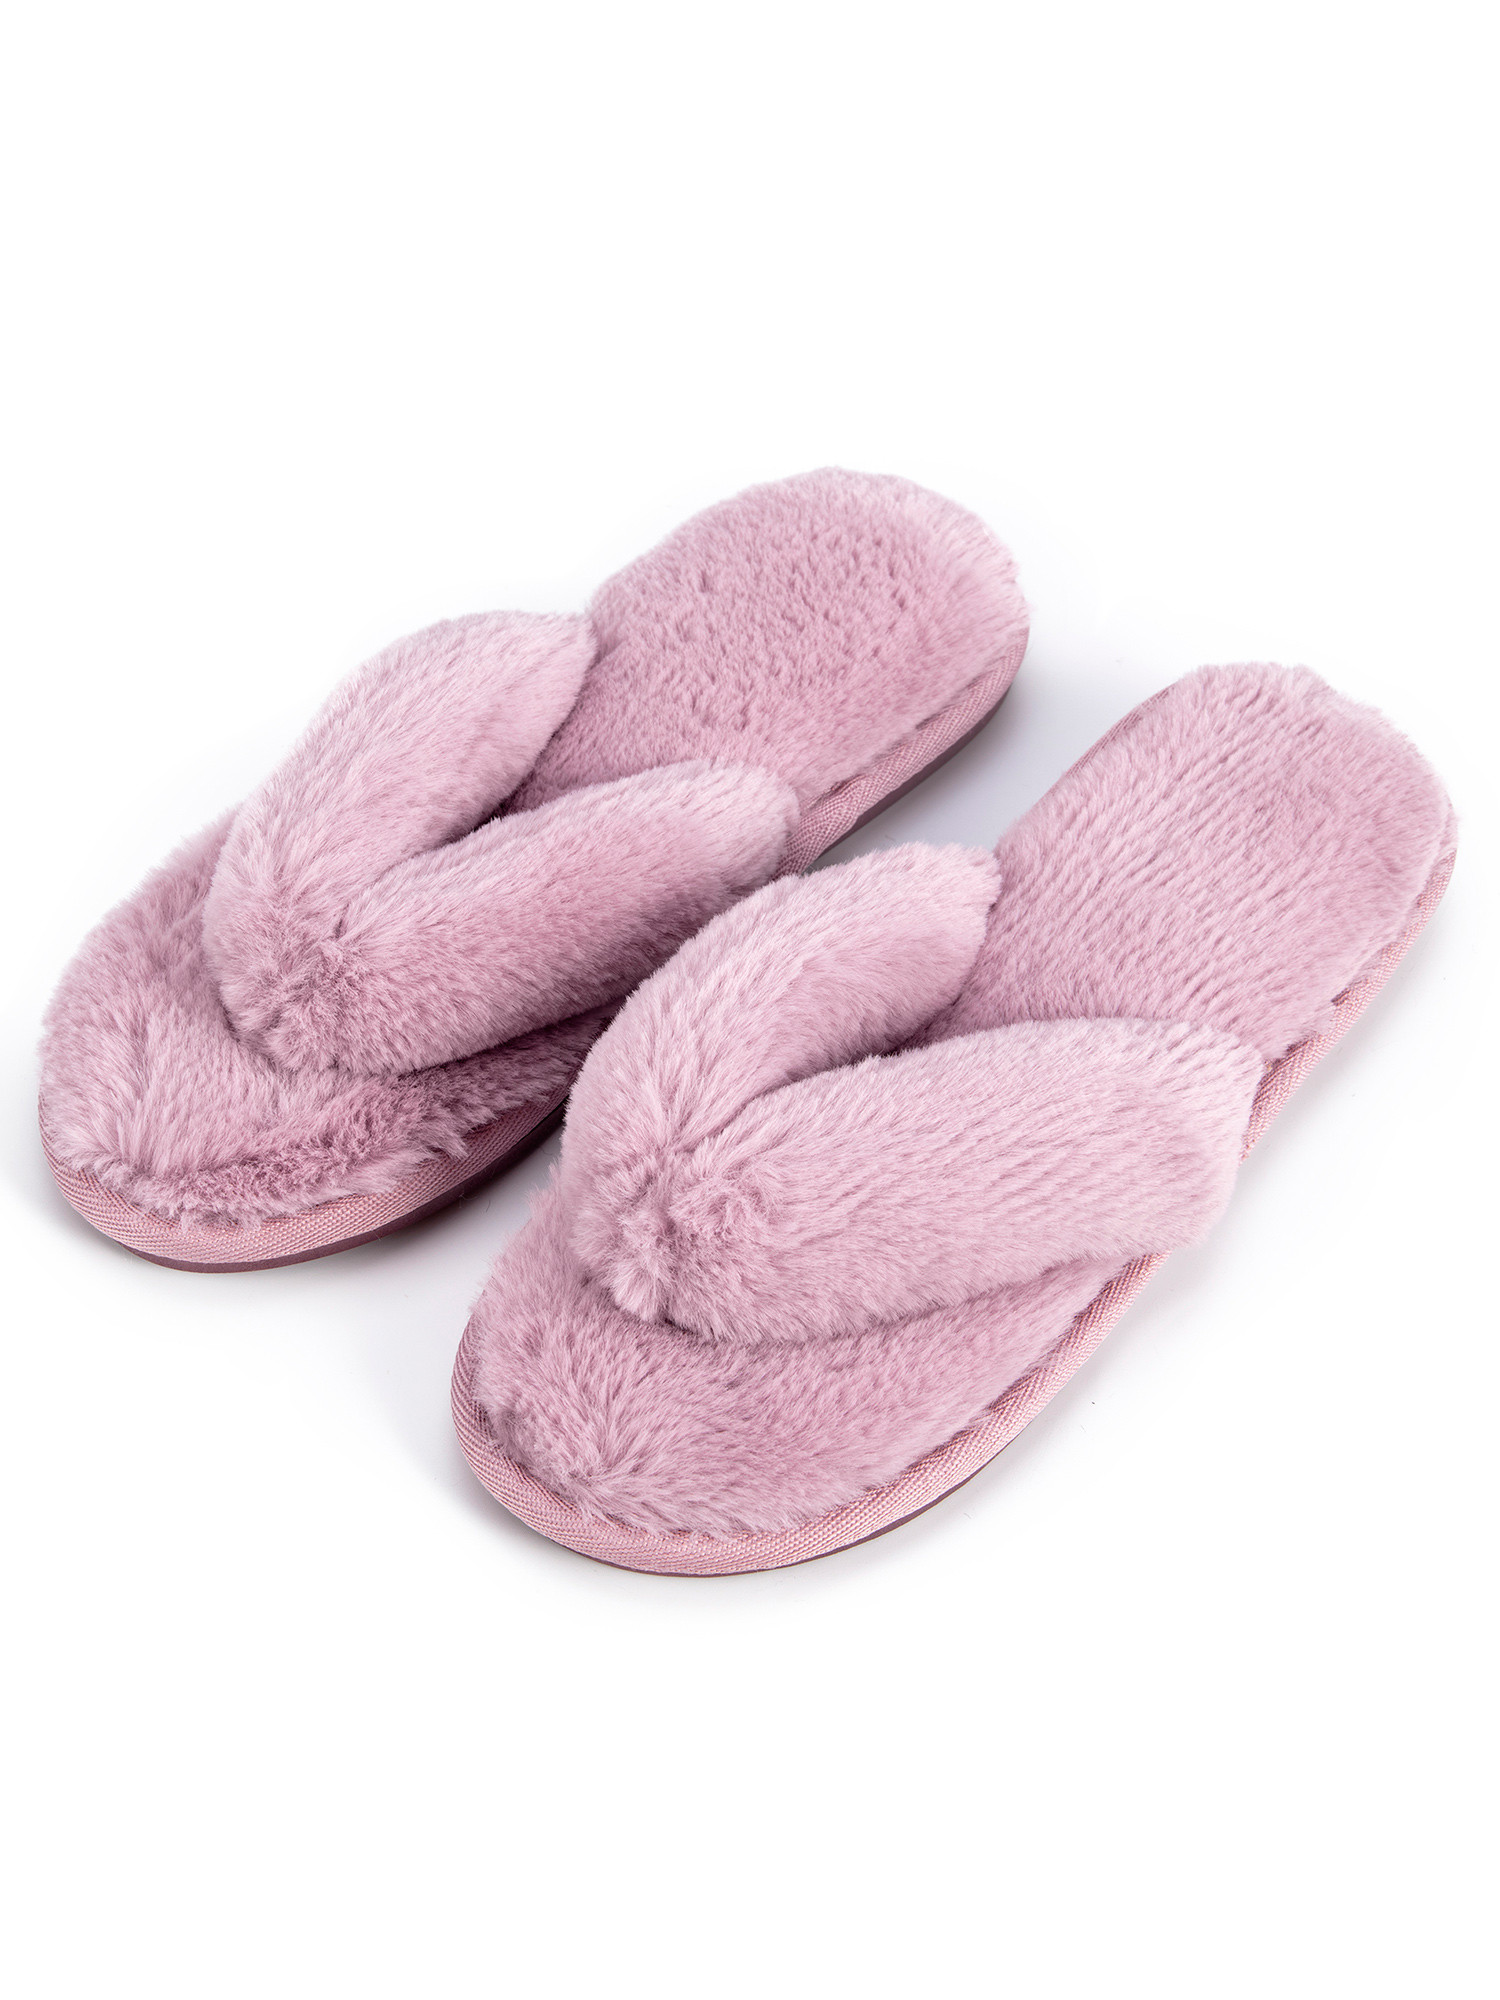 Bedroom Slippers Womens
 NK FASHION NK FASHION Women s Bedroom Slippers fort